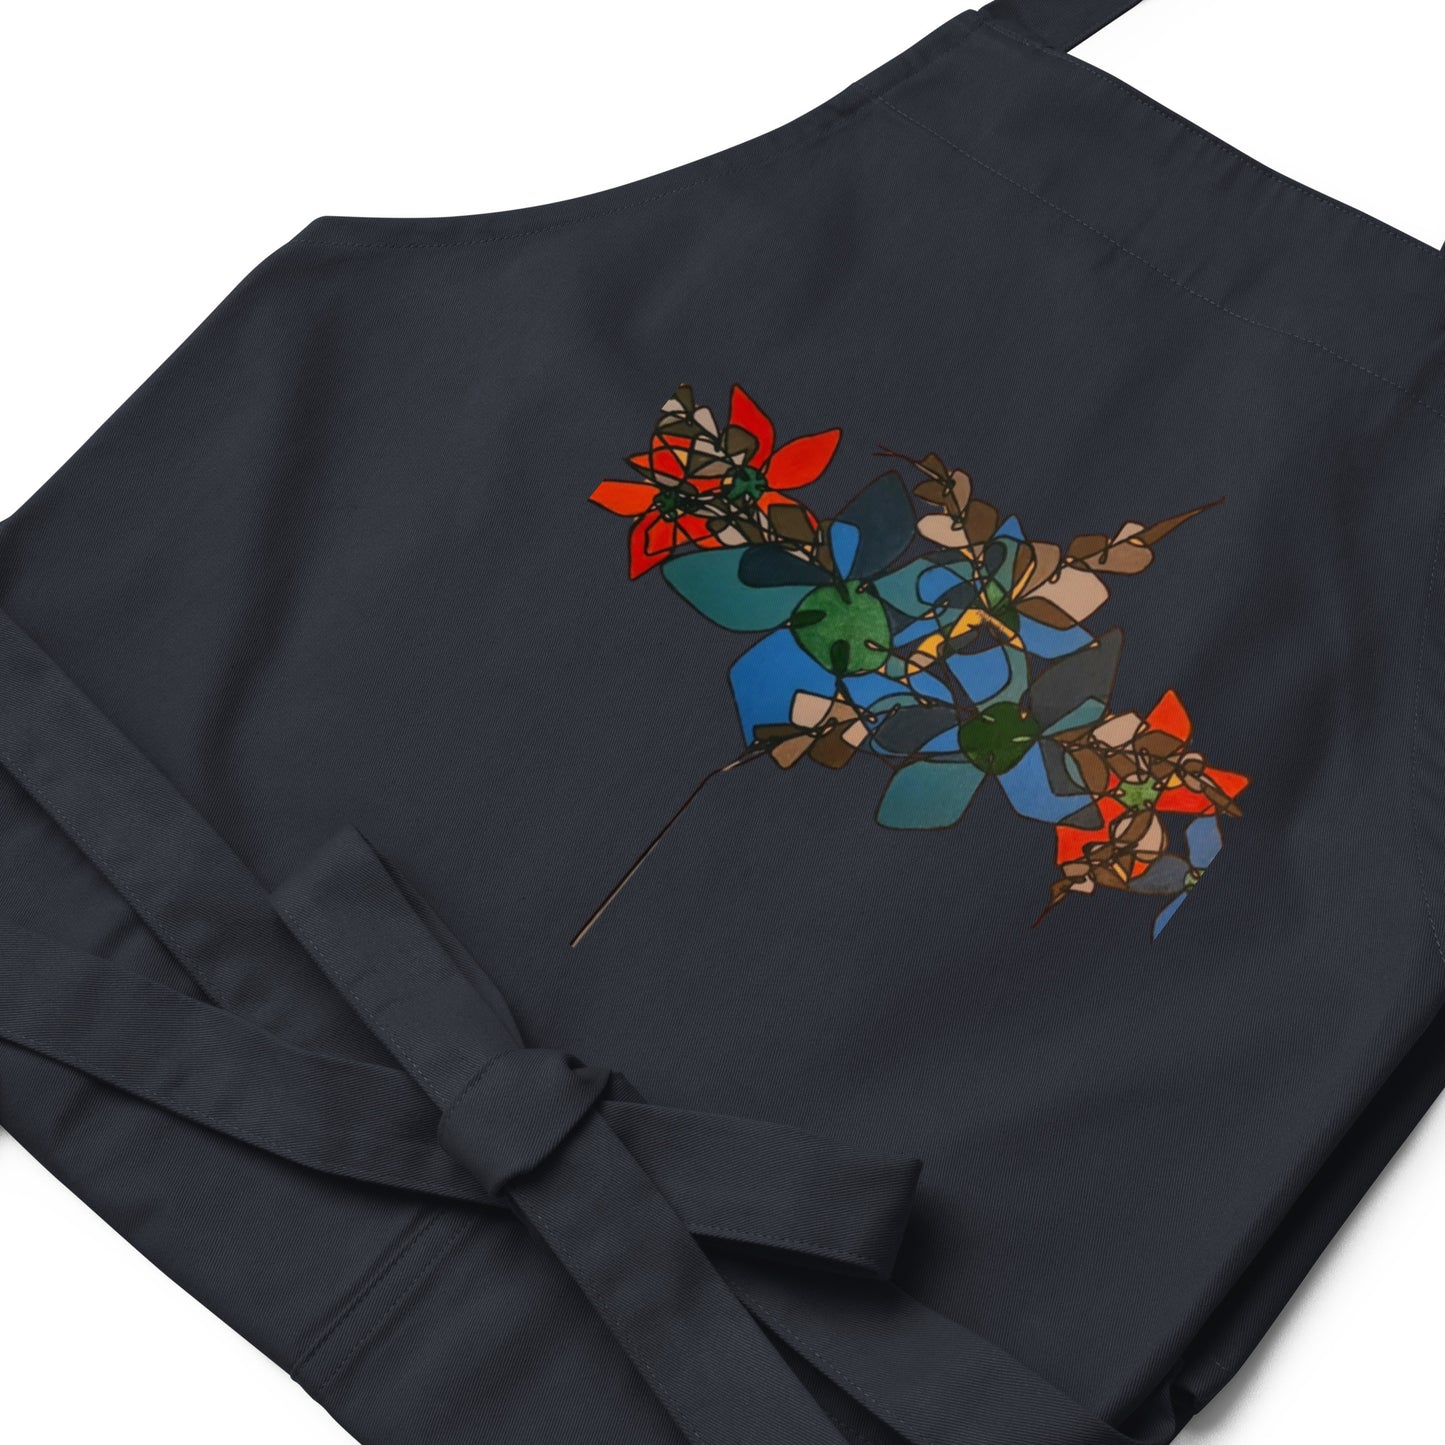 Abstract Flowers in Red and Blue Organic cotton apron